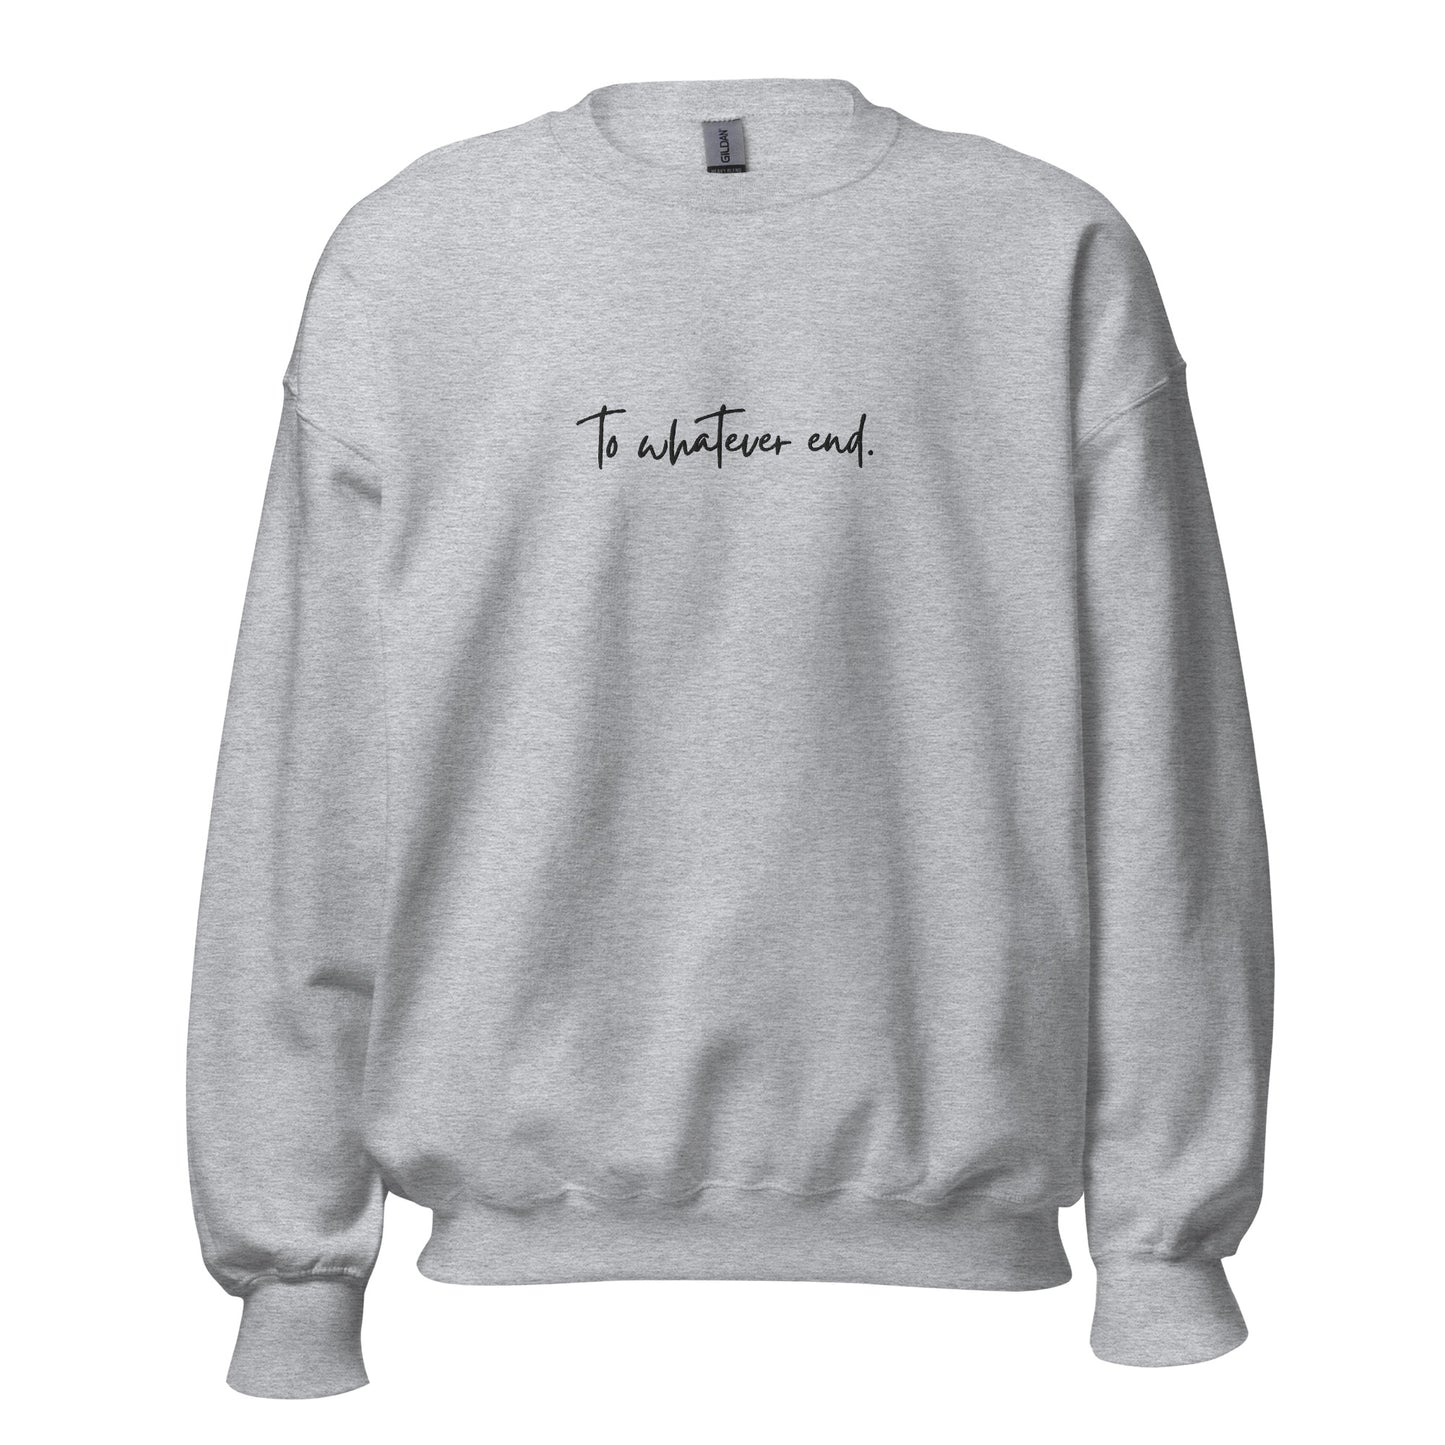 to whatever end embroidered sweatshirt